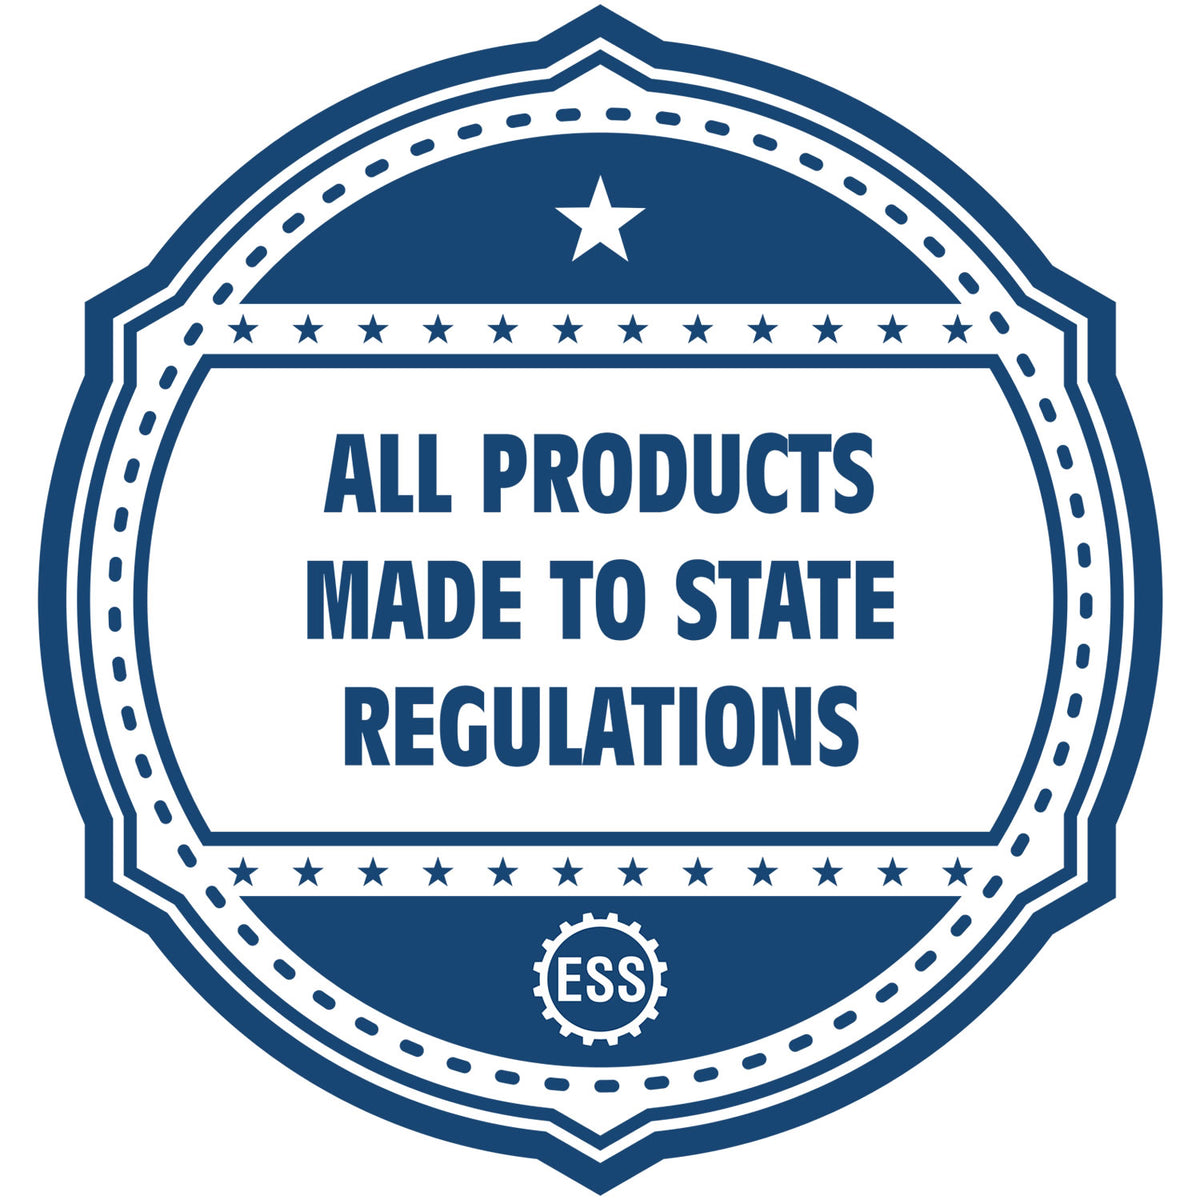 An icon or badge element for the California Engineer Desk Seal showing that this product is made in compliance with state regulations.